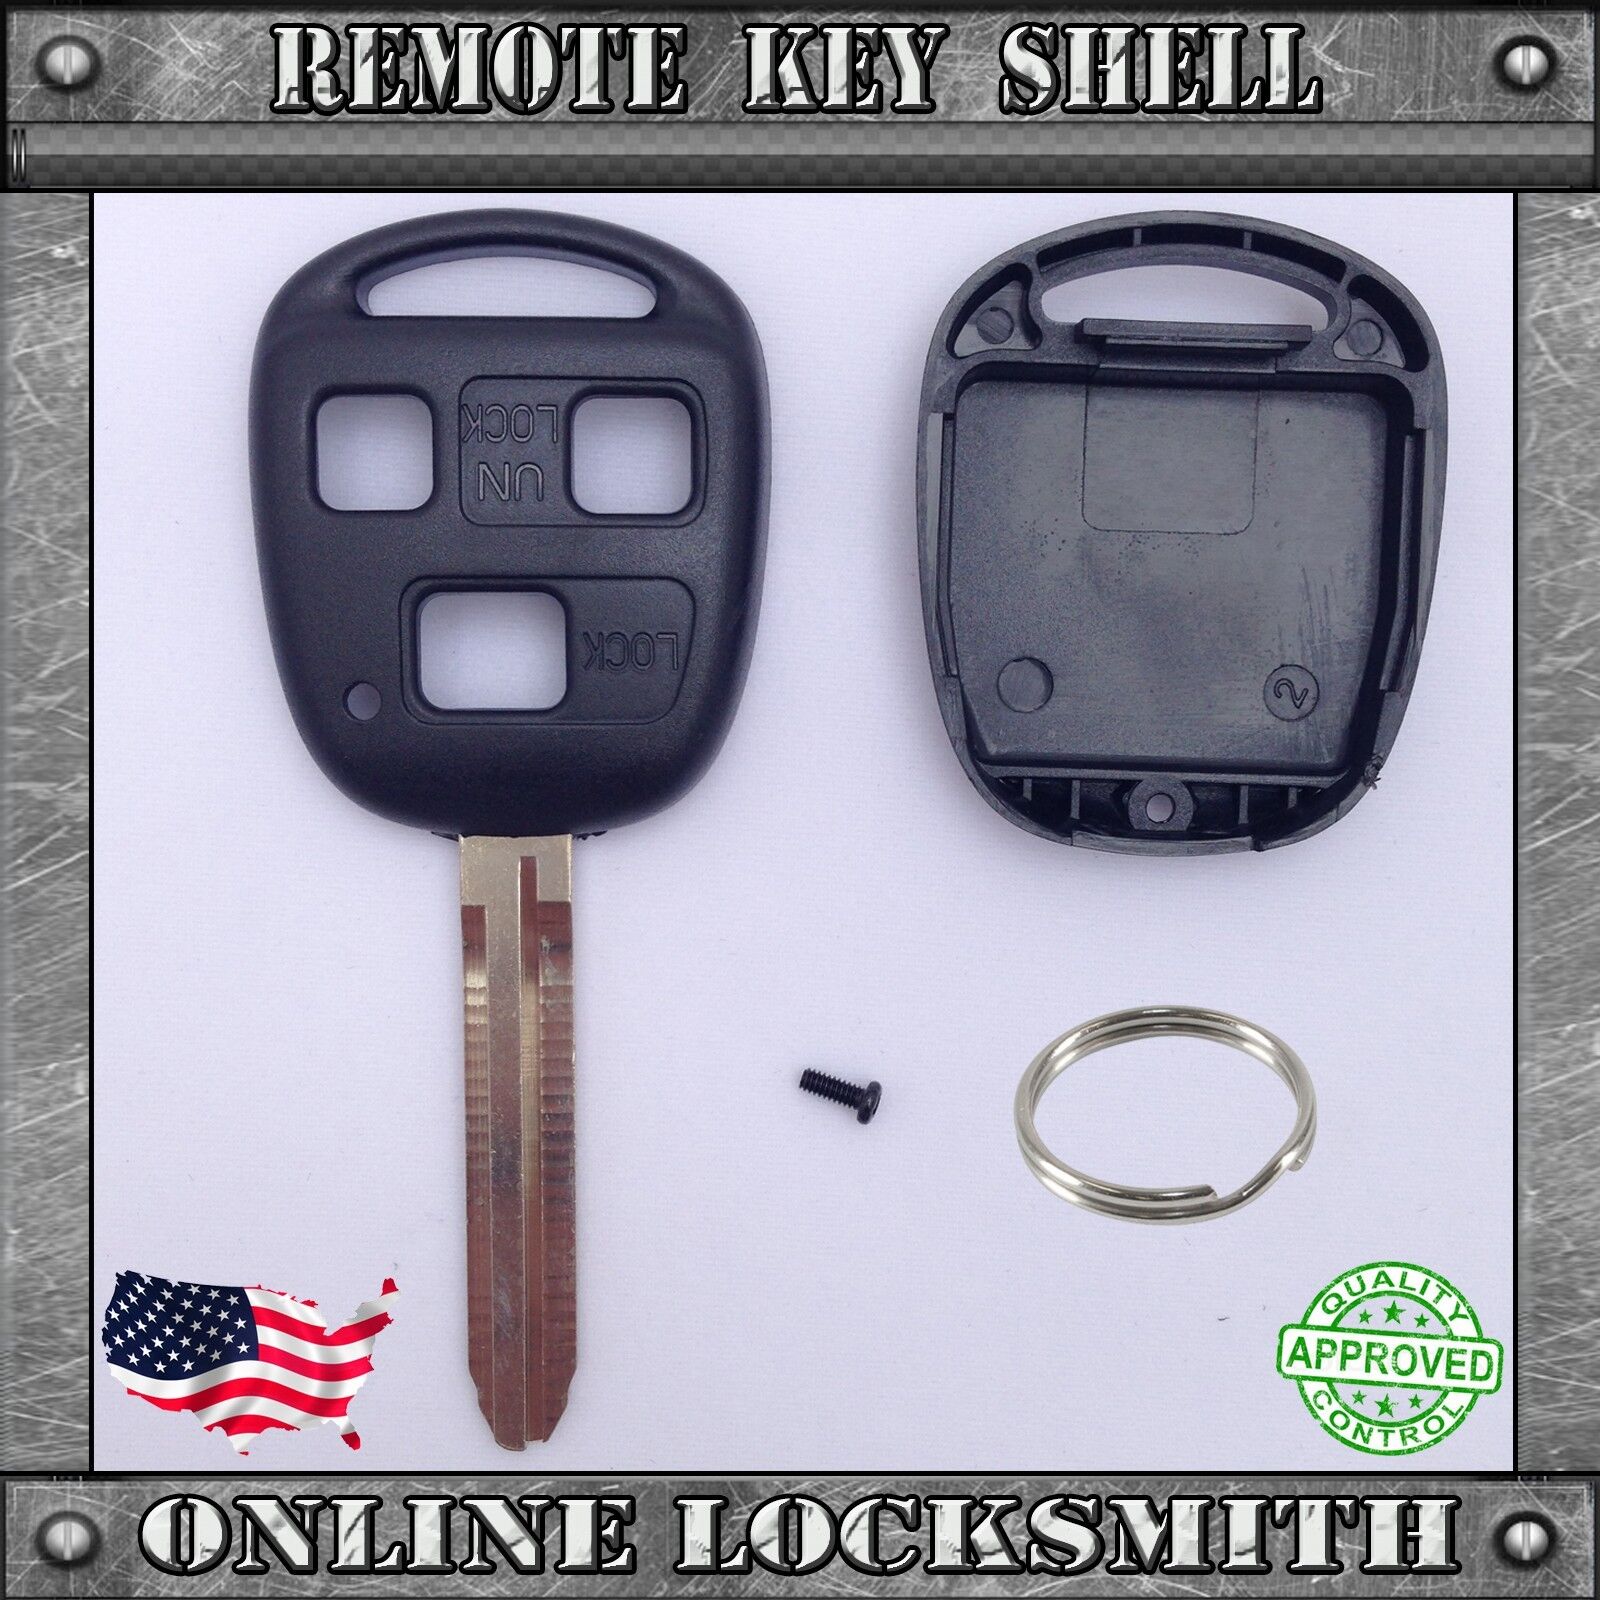 New Remote Key Shell Replacement Case For Toyota FJ Cruiser Land Cruiser Key Fob